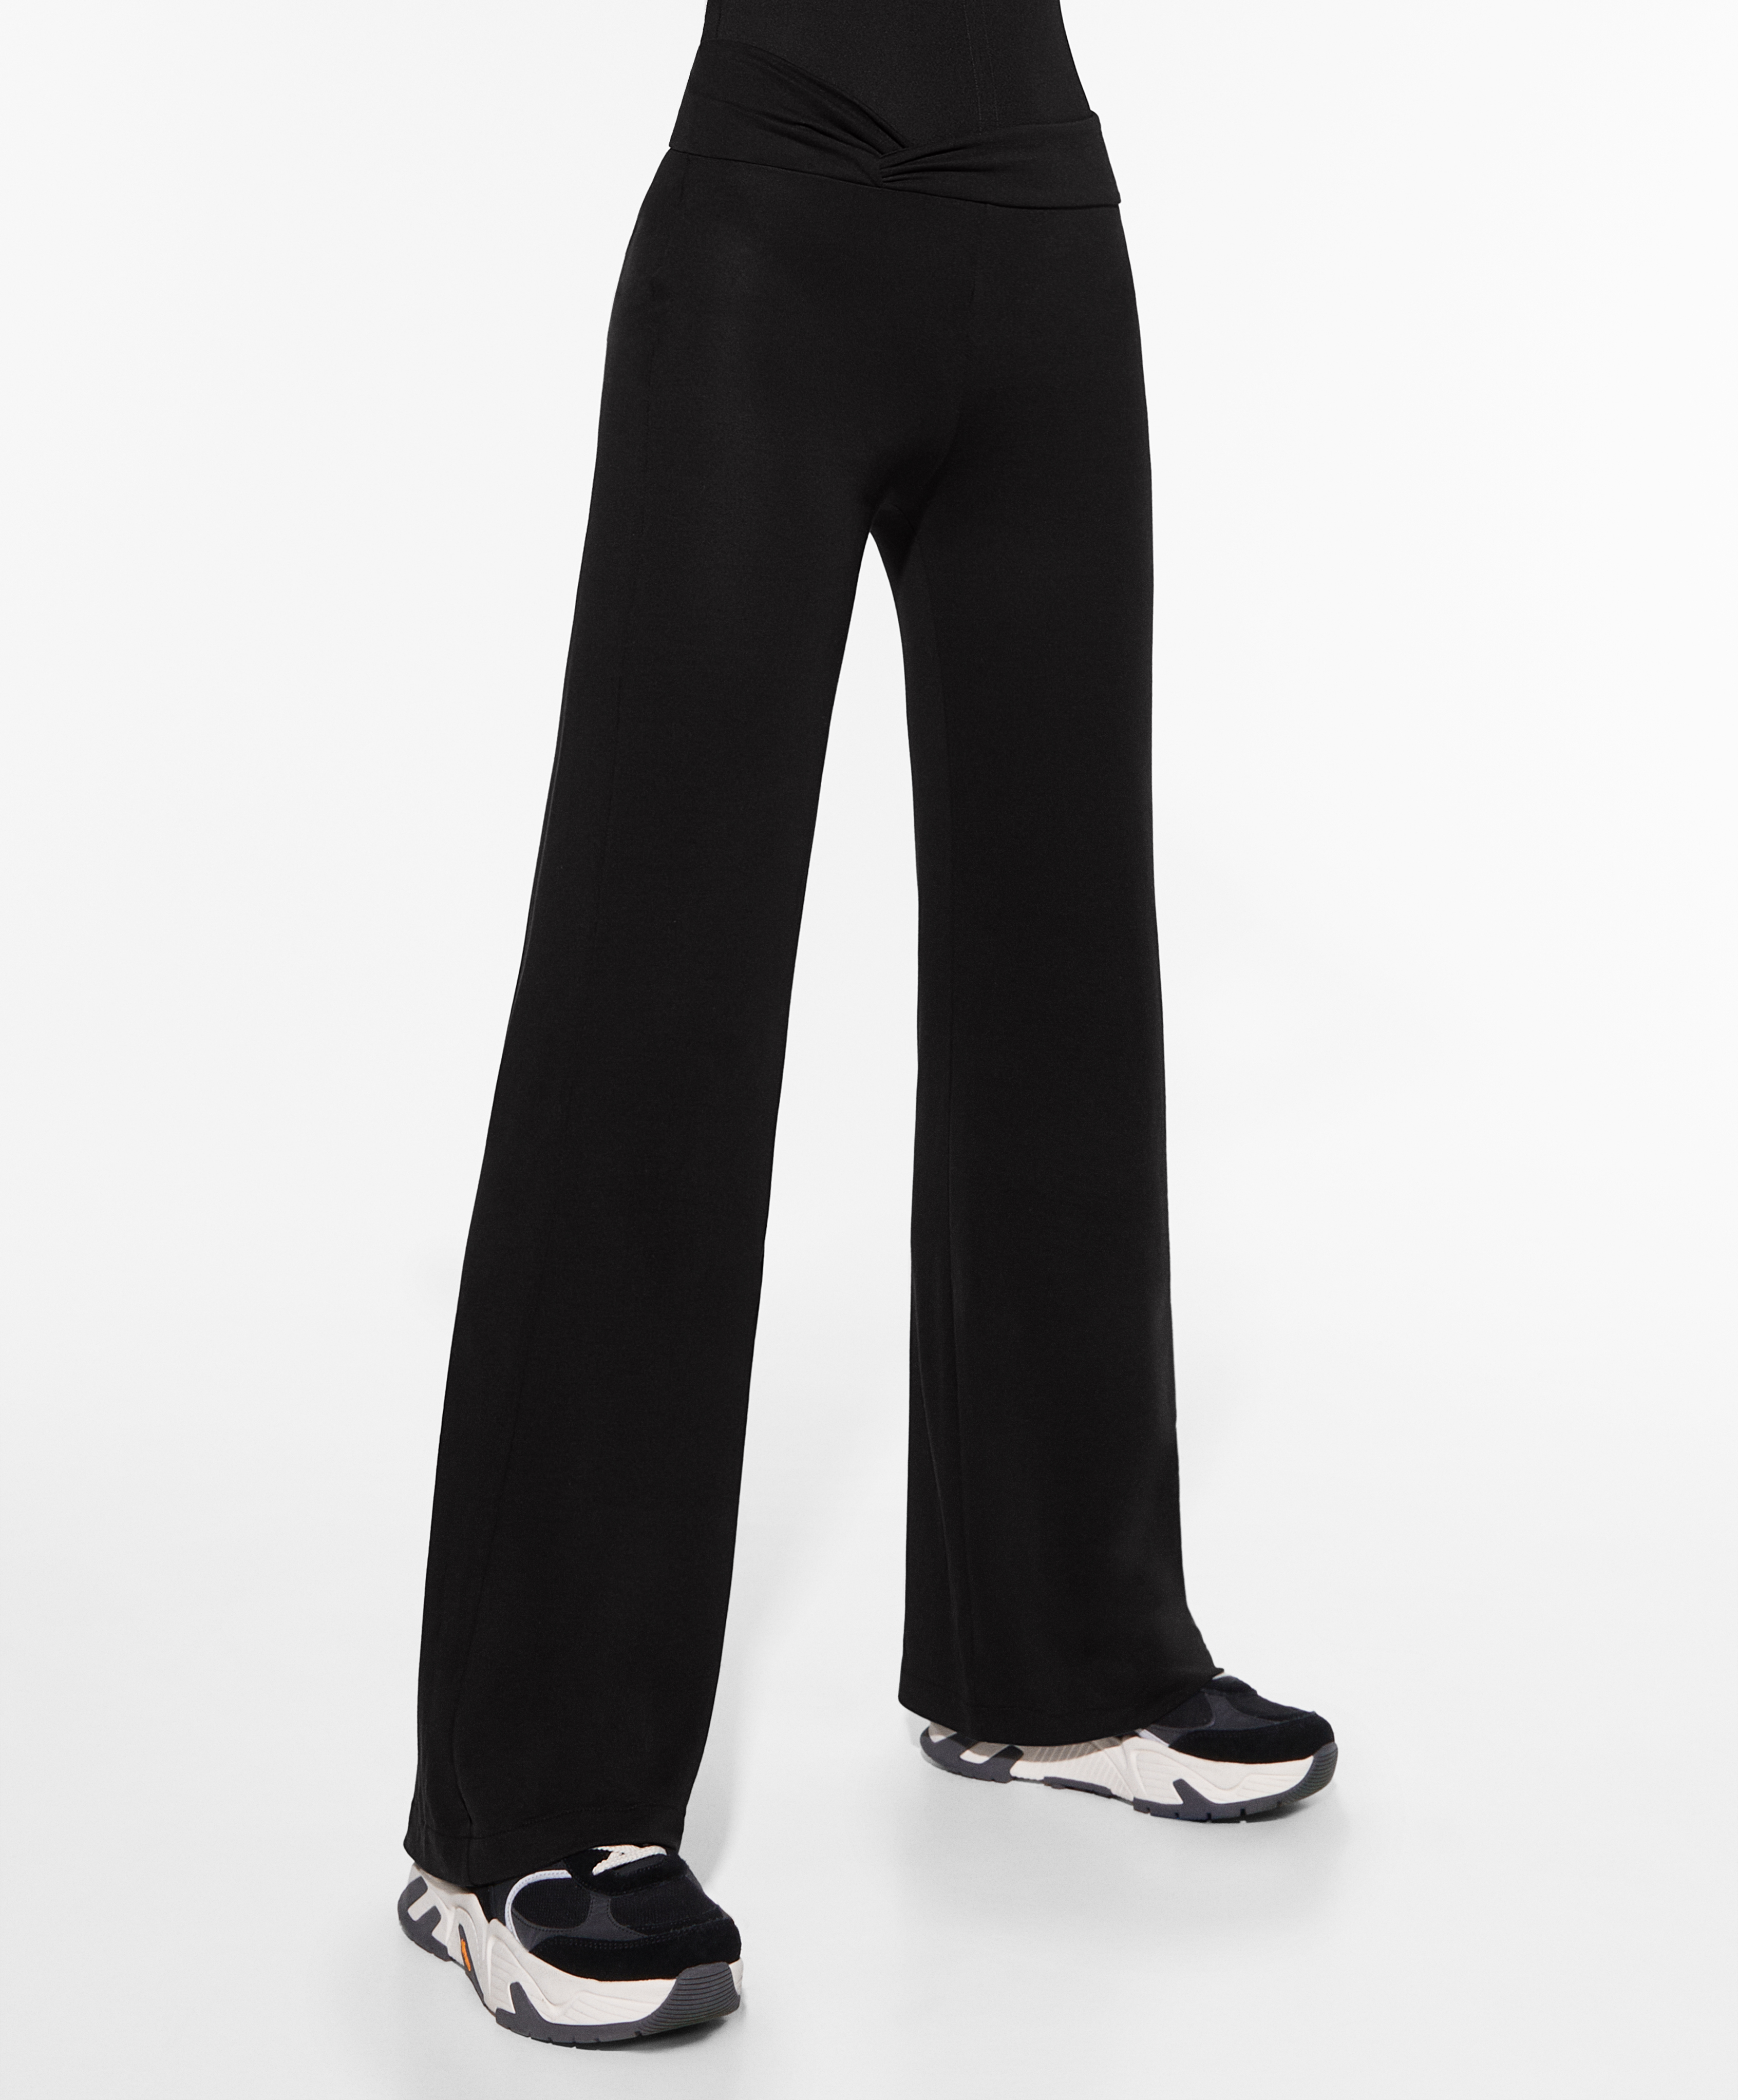 Modal flare trousers